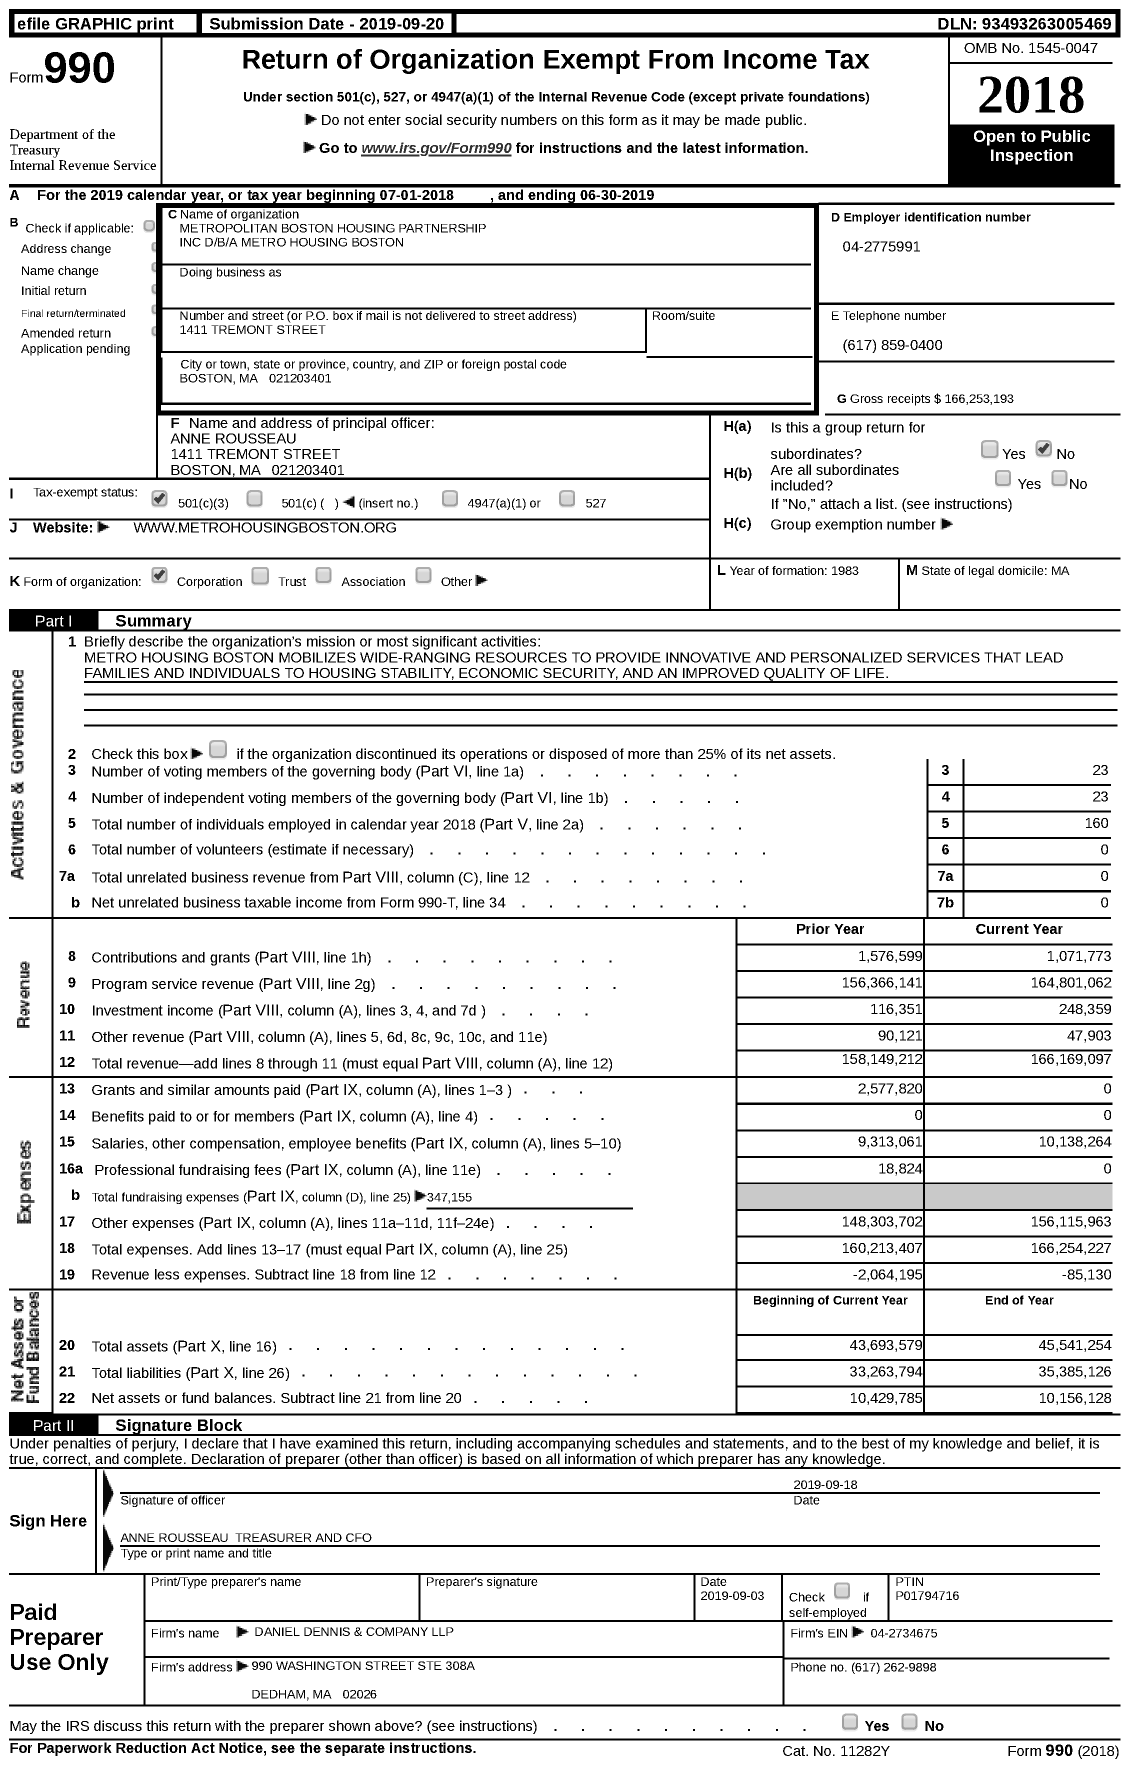 Image of first page of 2018 Form 990 for Metro Housing Boston (MBHP)